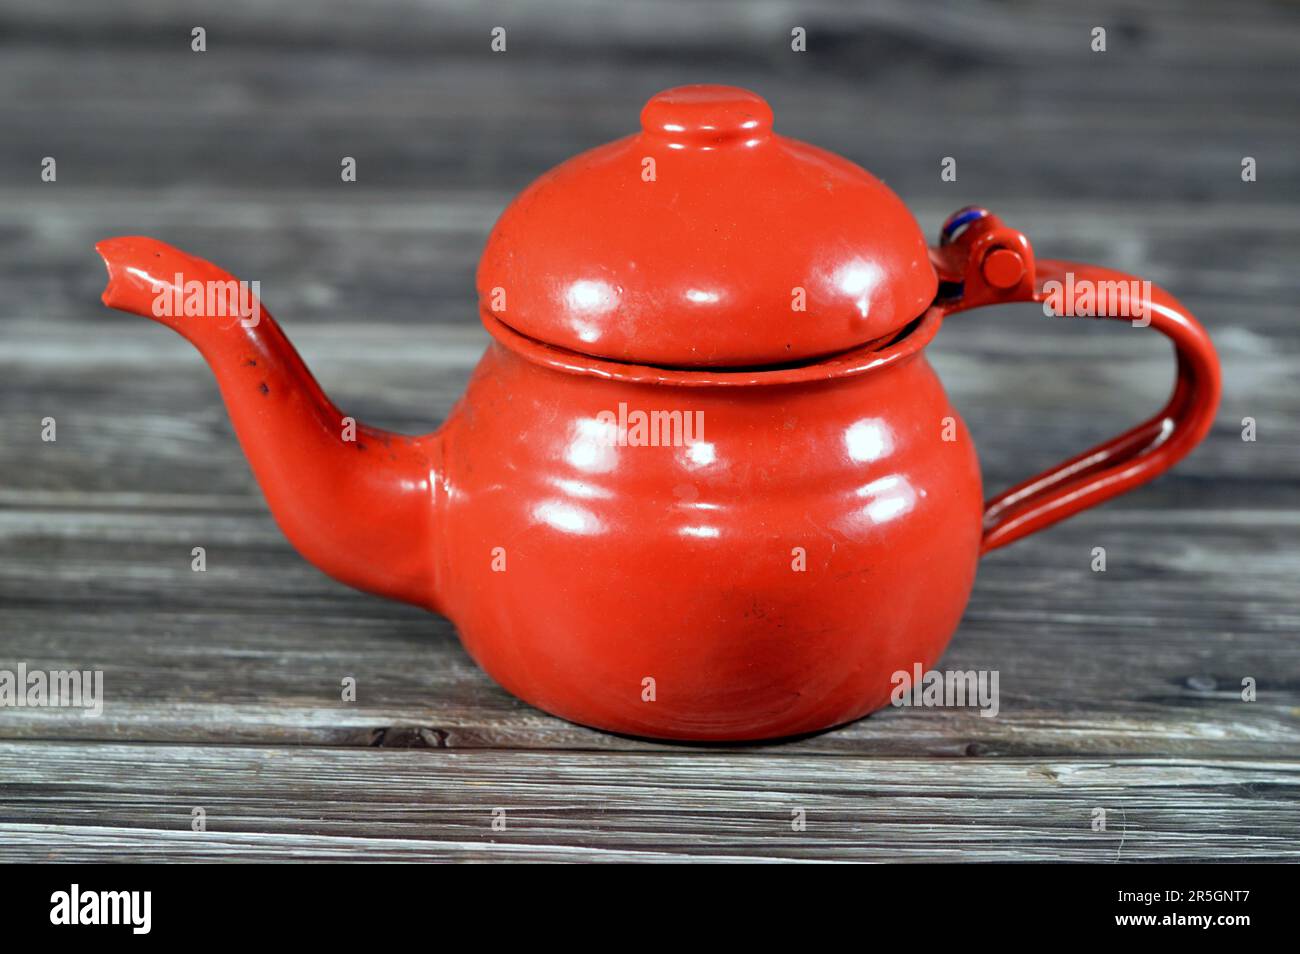 https://c8.alamy.com/comp/2R5GNT7/a-vintage-retro-old-style-teapot-red-tea-pot-isolated-on-wooden-background-a-container-for-making-and-serving-tea-with-a-handle-and-a-shaped-opening-2R5GNT7.jpg